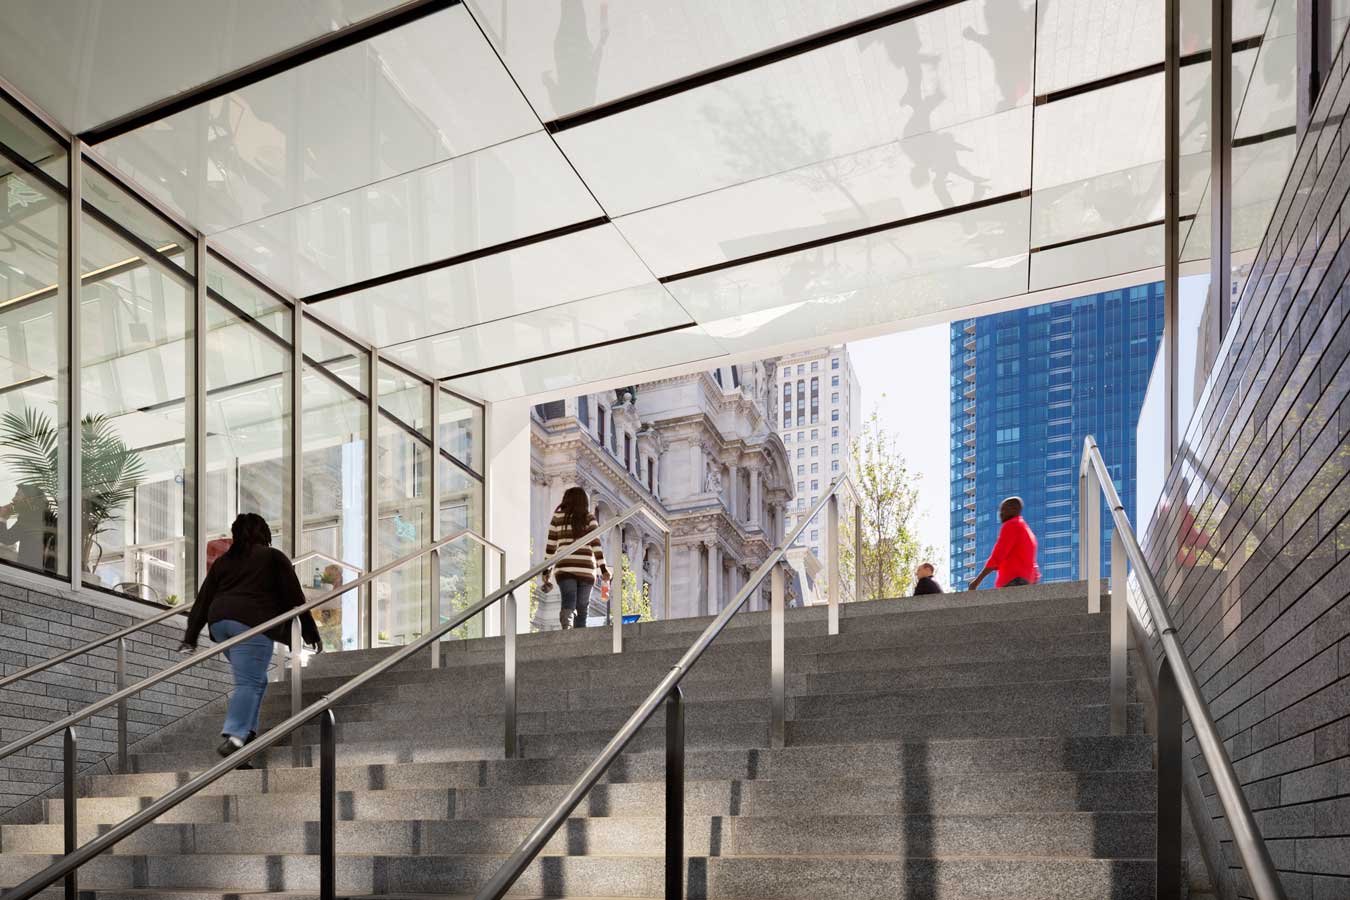 <p>As one emerges from the concourse, the transit entries frame new views of City Hall, stirring renewed appreciation for the grandeur of this part of the city. <br><small>&copy; James Ewing Photography</small></p>